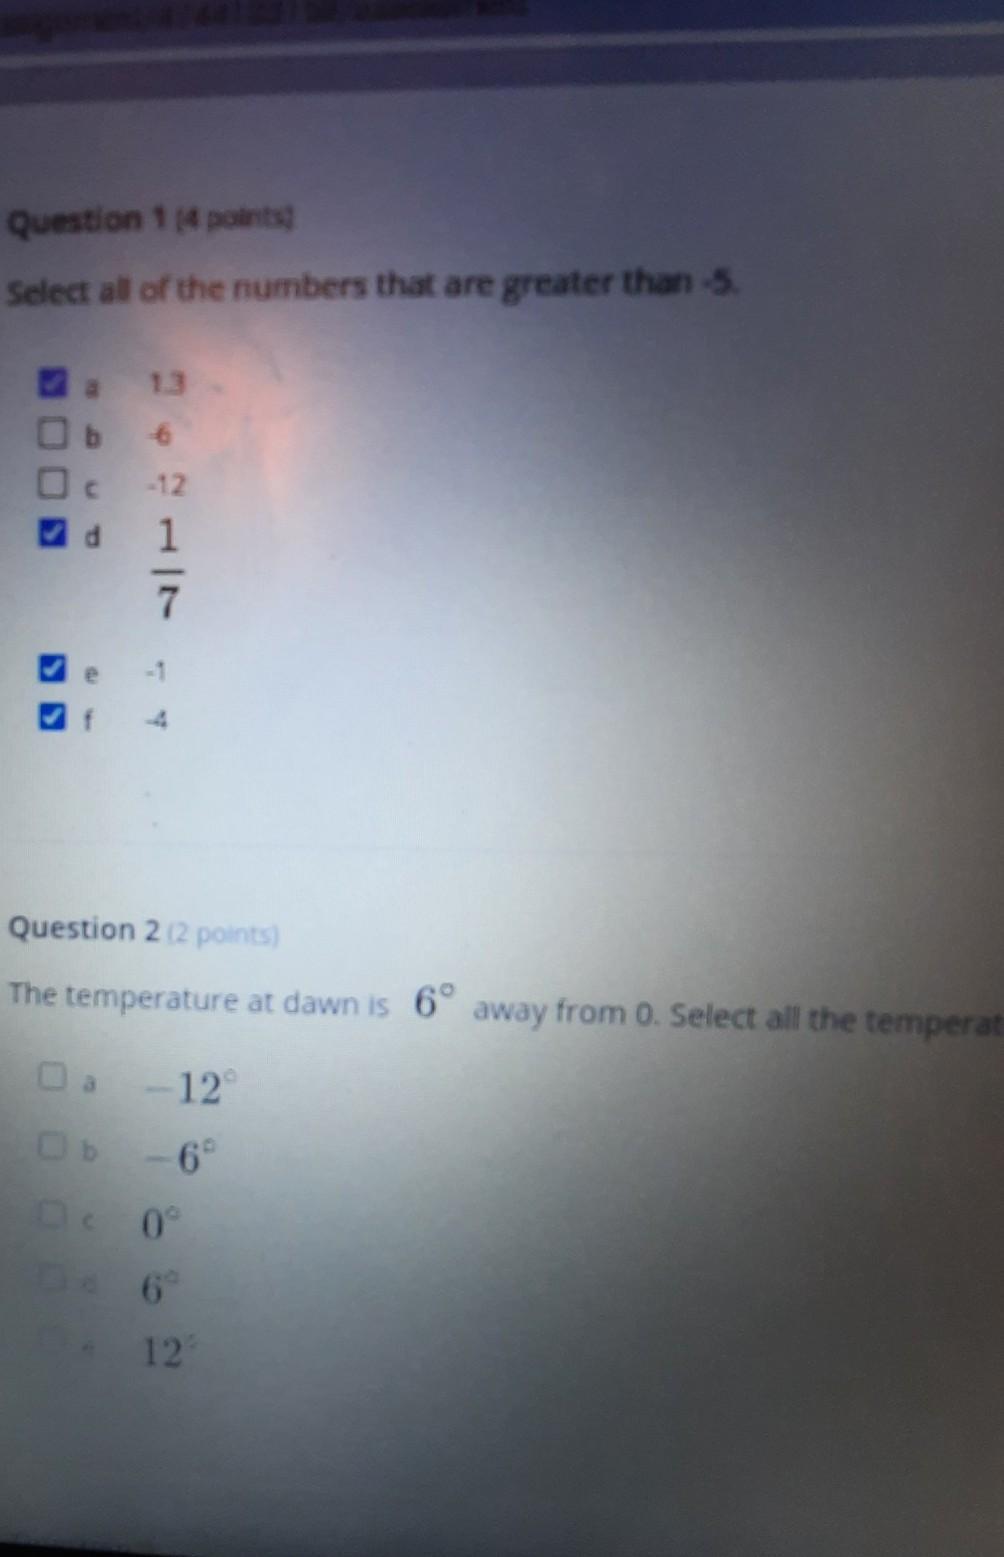 Need Help I Don't Know Of I Got The The First Problems Rigth So Just Please Tell Me If I Did And Please